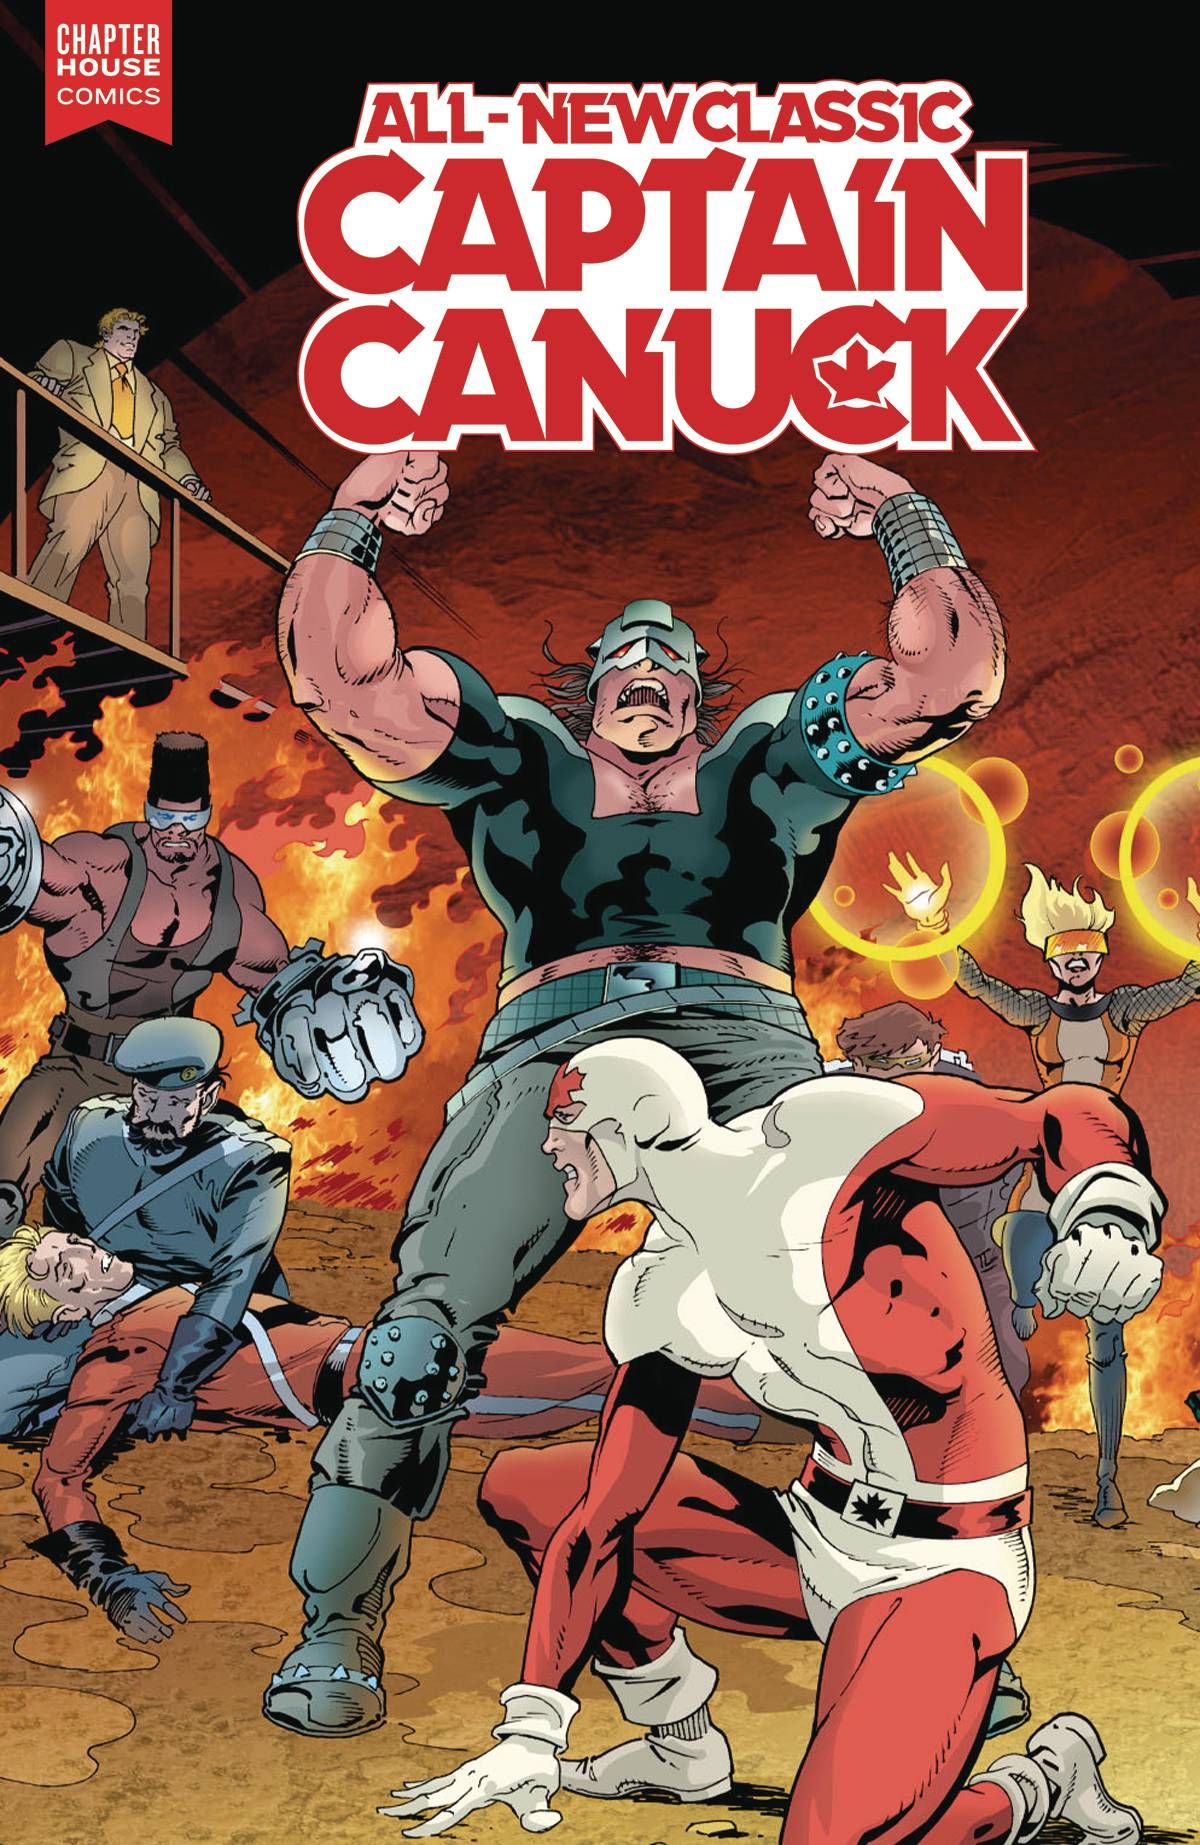 All-New Classic Captain Canuck #4 Comic